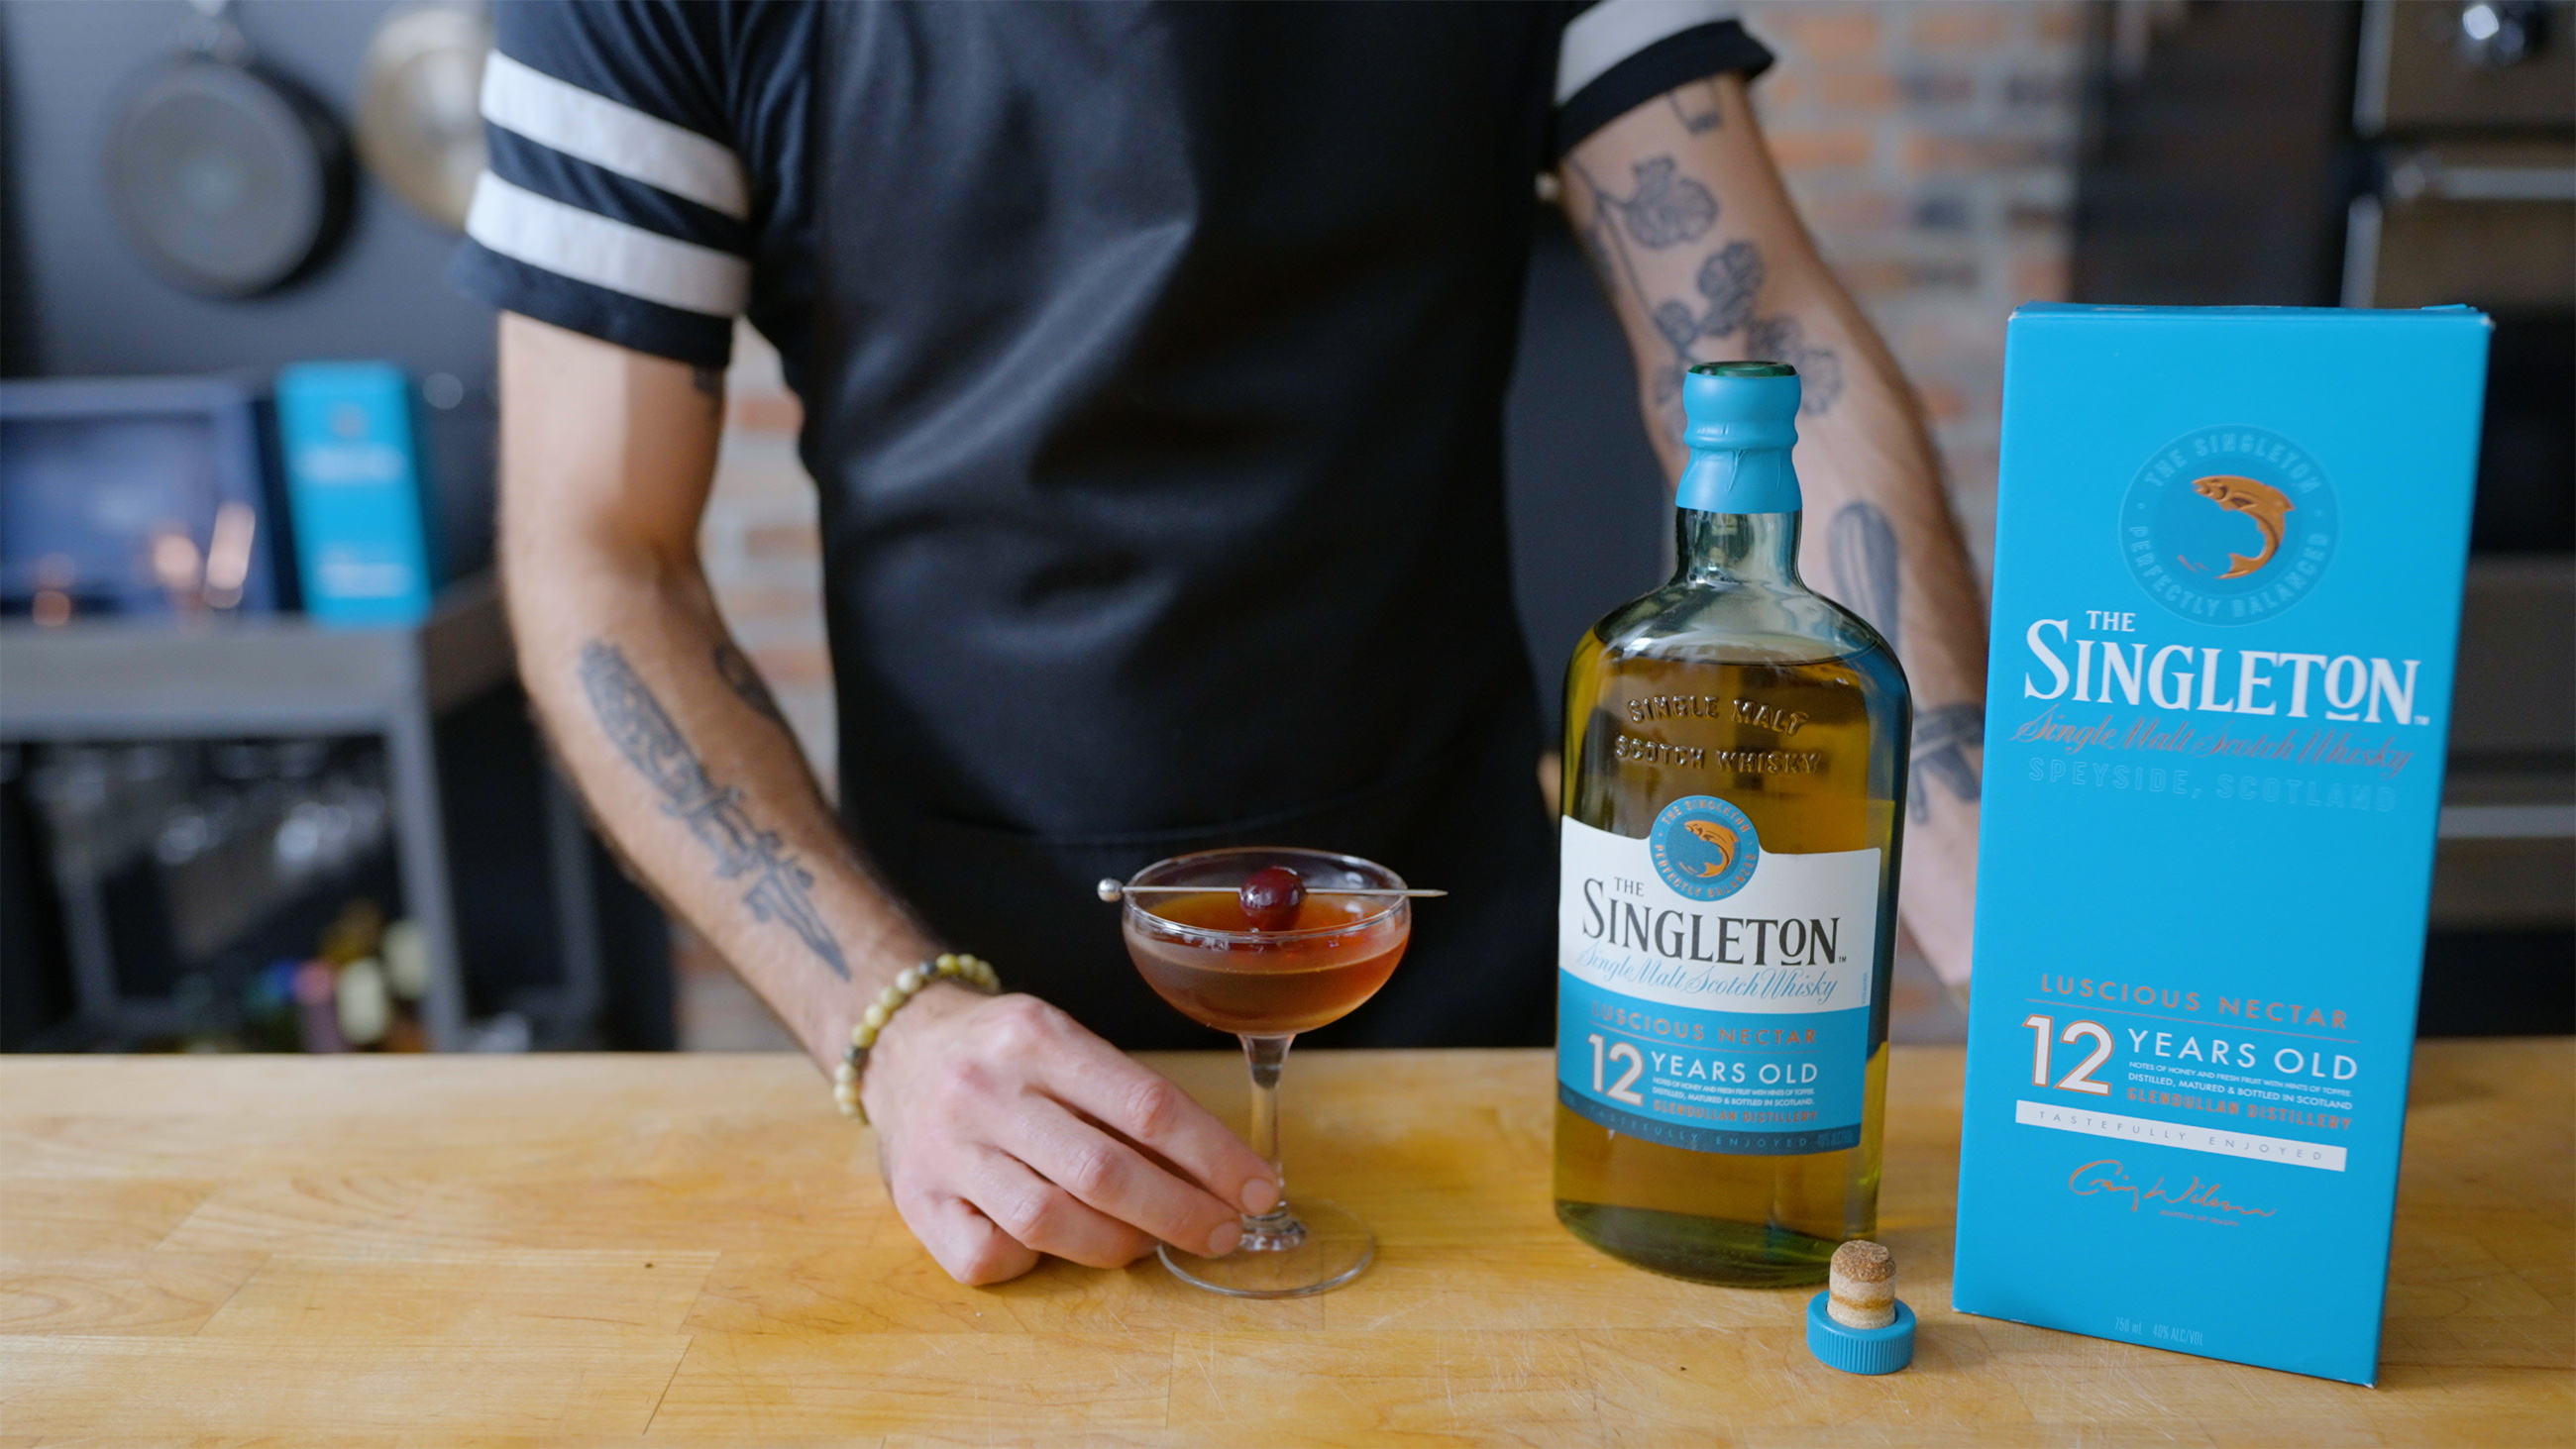 Babish and Omi recreate a Manhattan with Black Walnut Bitters made with The Singleton, a Single Malt Whisky best made for sharing and celebrating those who are close to us.